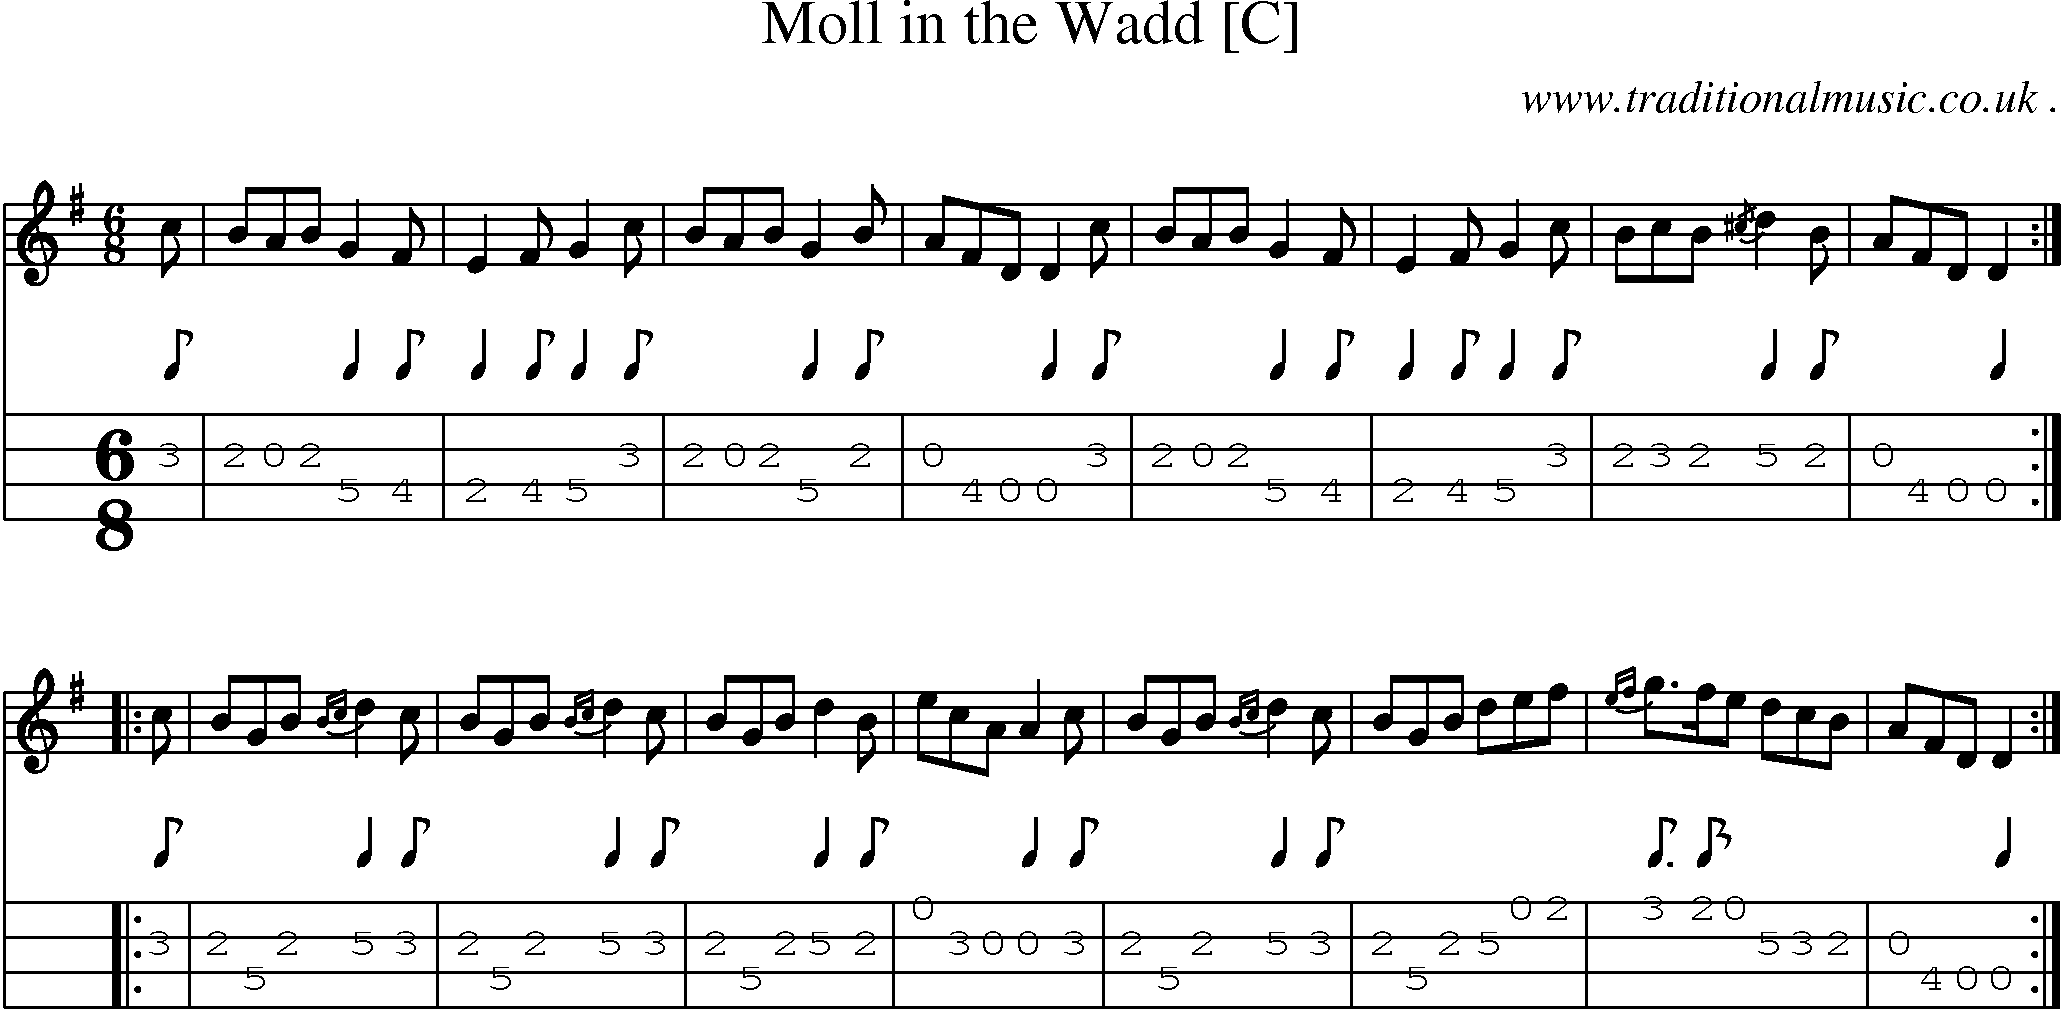 Sheet-music  score, Chords and Mandolin Tabs for Moll In The Wadd [c]